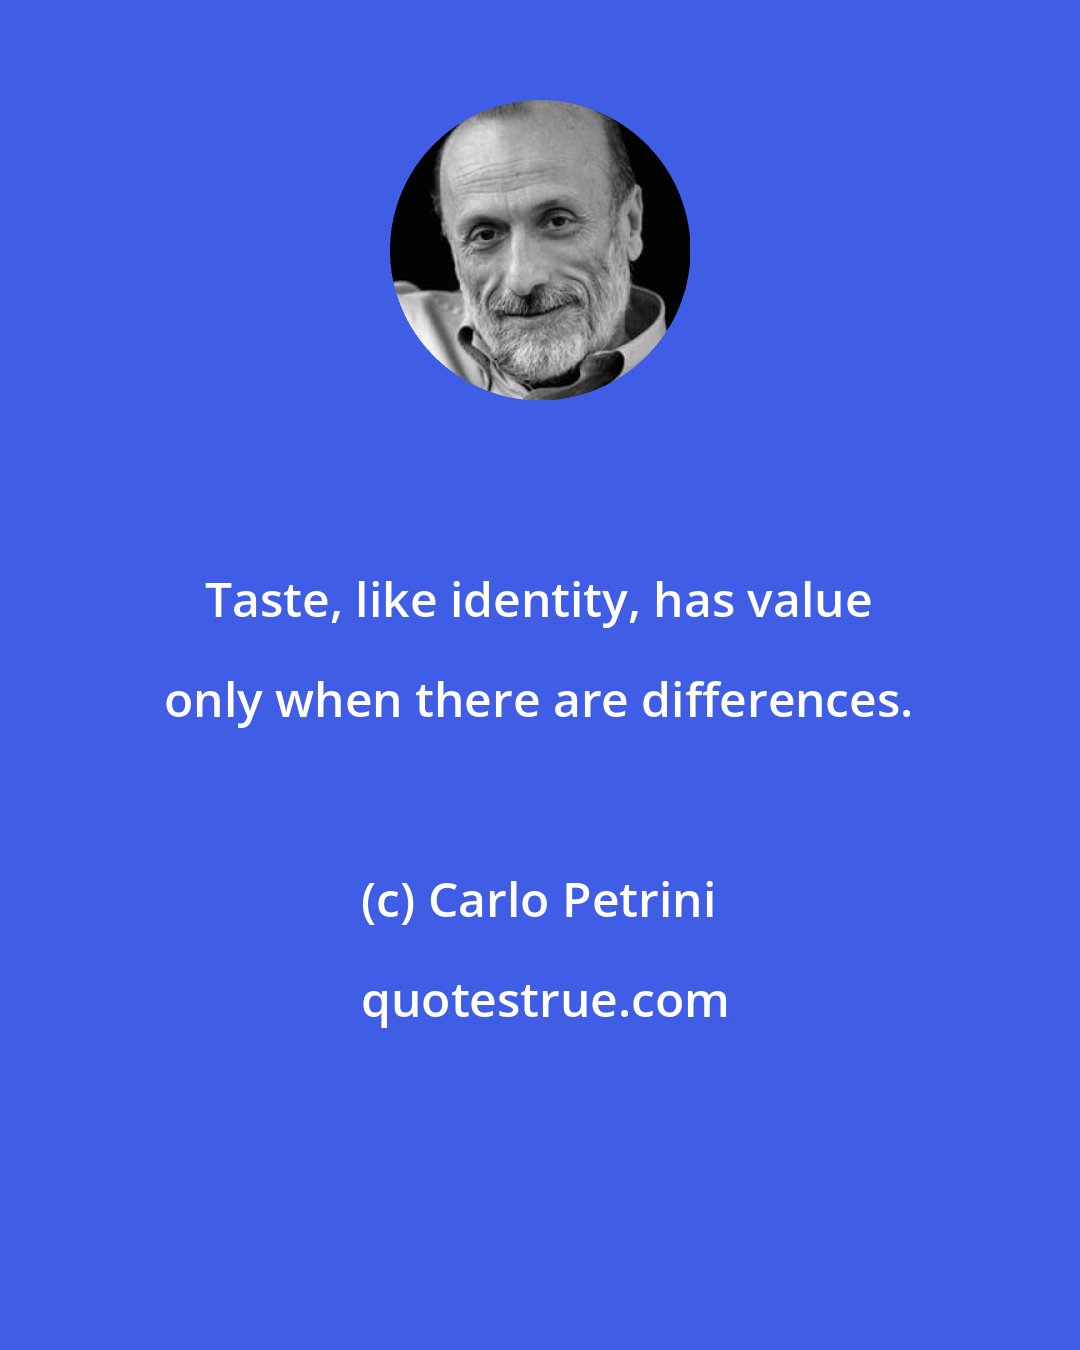 Carlo Petrini: Taste, like identity, has value only when there are differences.